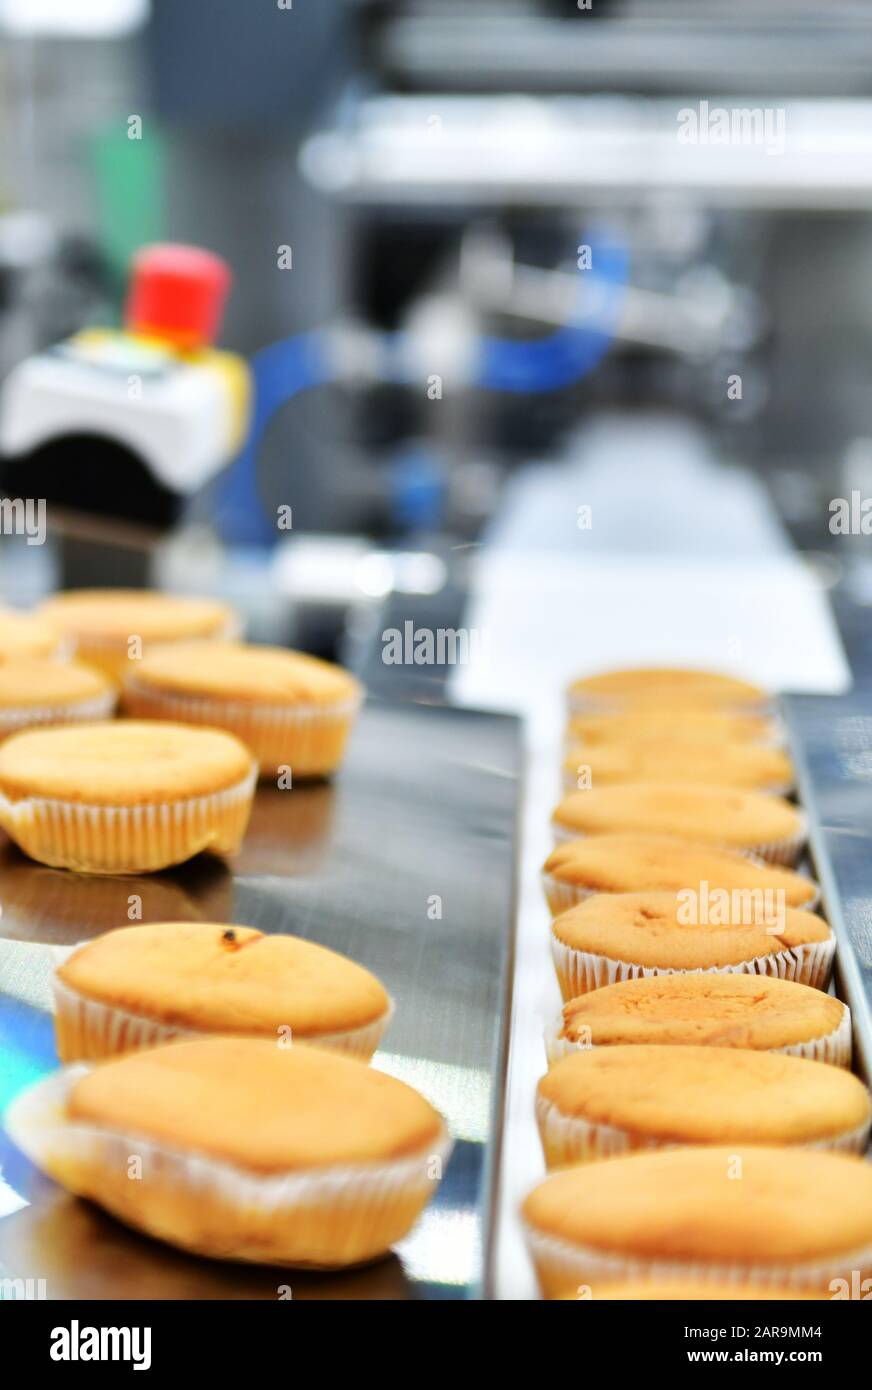 Automatic bakery muffins production line on conveyor belt equipment machinery in factory, industrial food production Stock Photo